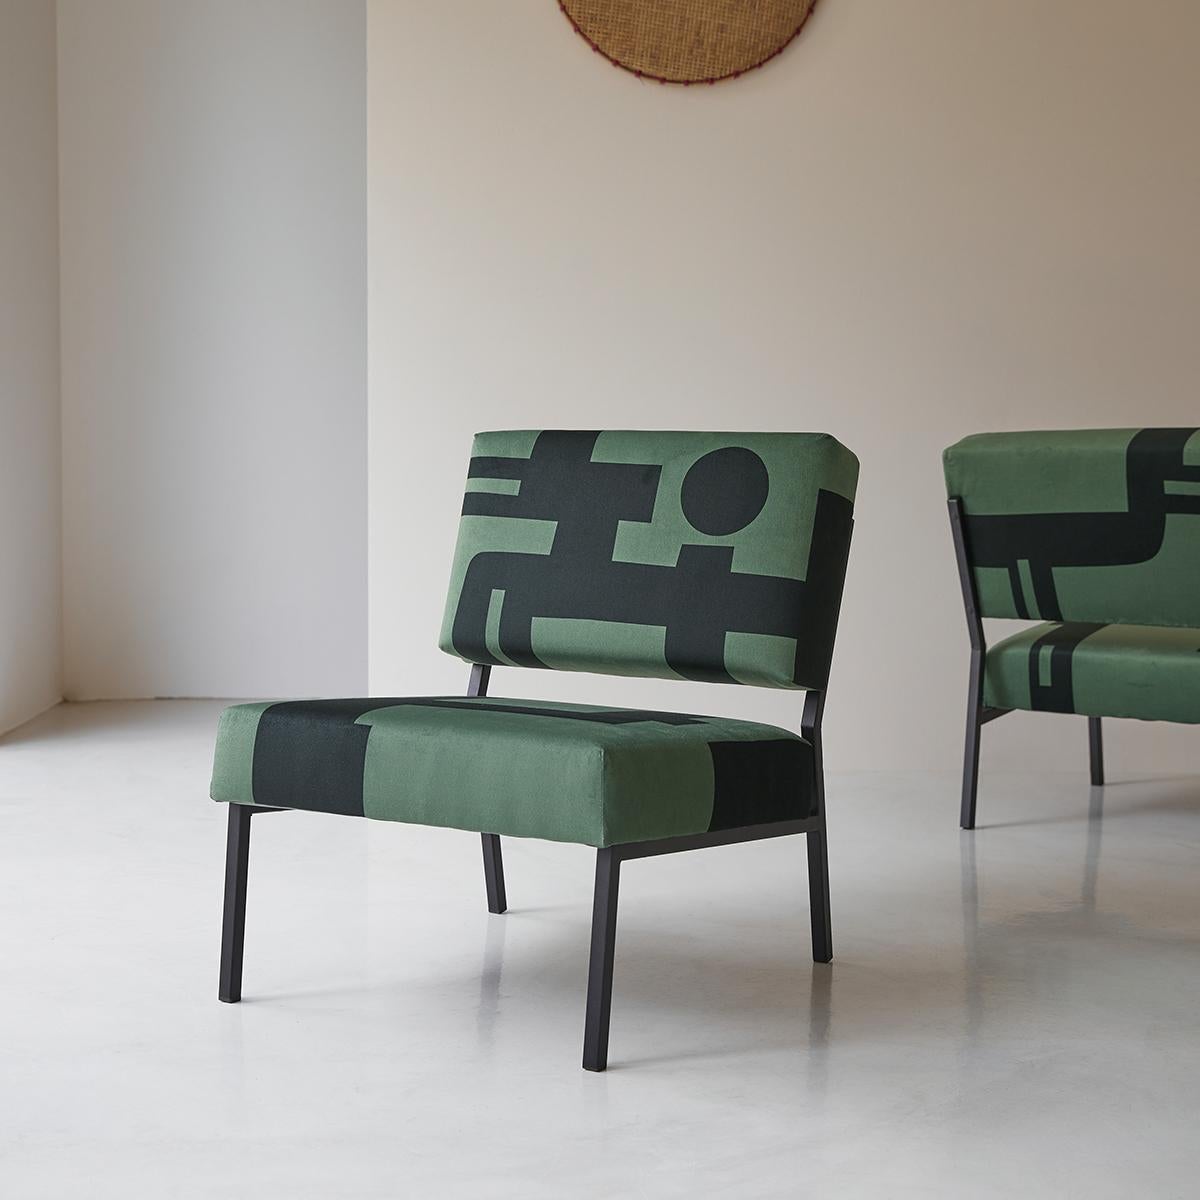 Barbican Green O2 armchair by Babel Brune
Dimensions: D 63 x W 54 x H 67 cm, Seat H 35 cm.
Material: Suede velvet printed in France, steel.

Inspired by the style of the 70's, the Barbican Green armchair by Babel Brune offers a unique design.